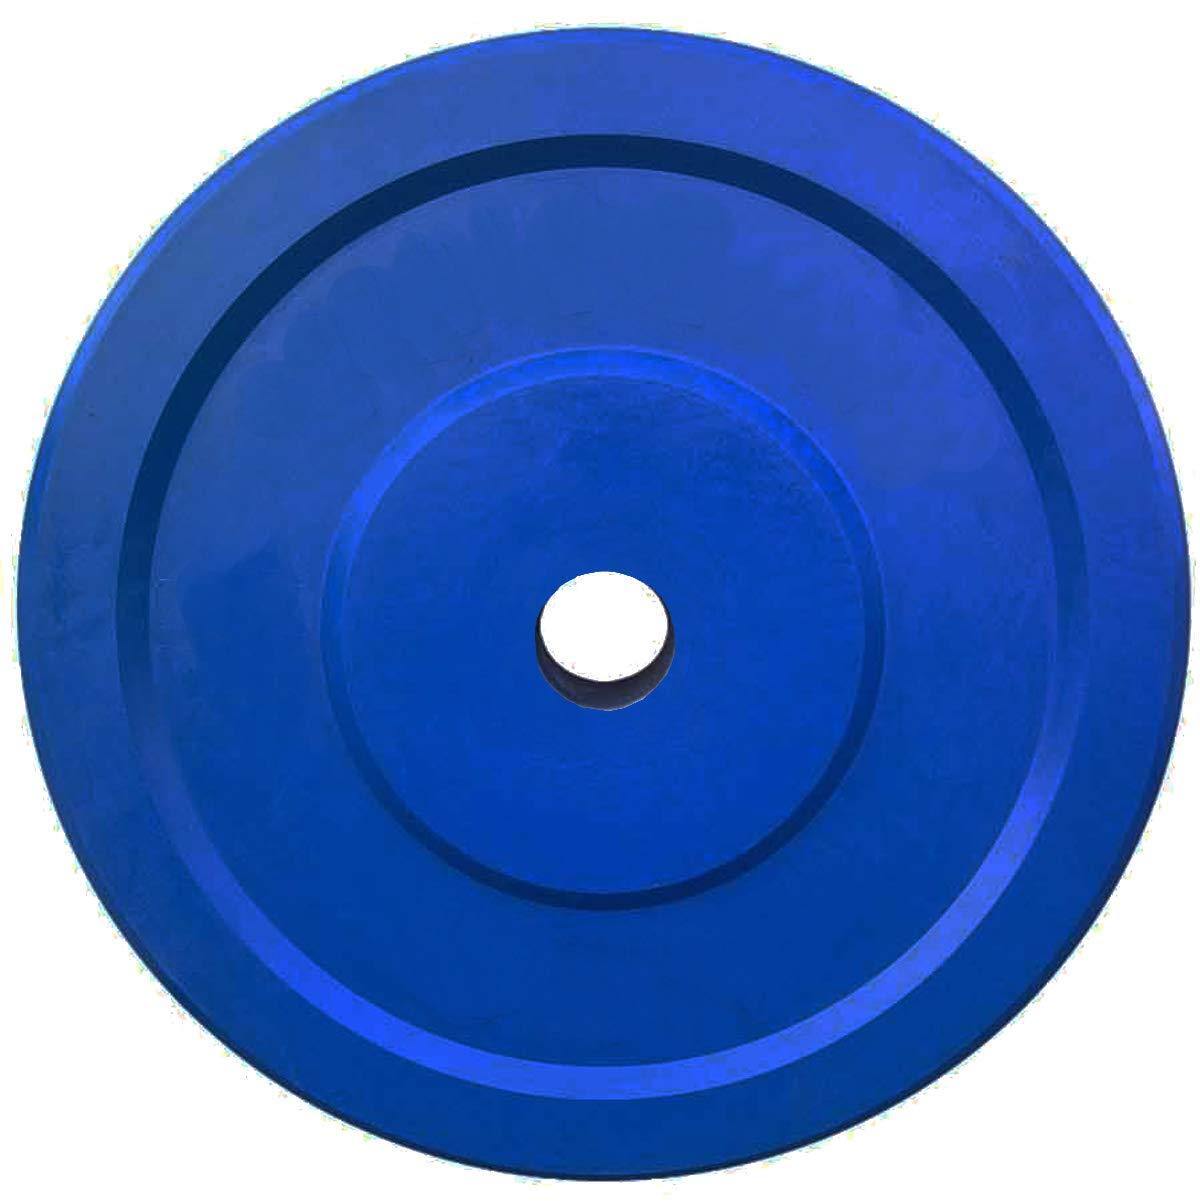 Prokick Rubber Weight Plate with 28 MM Bore, Blue (Single) - Best Price online Prokicksports.com